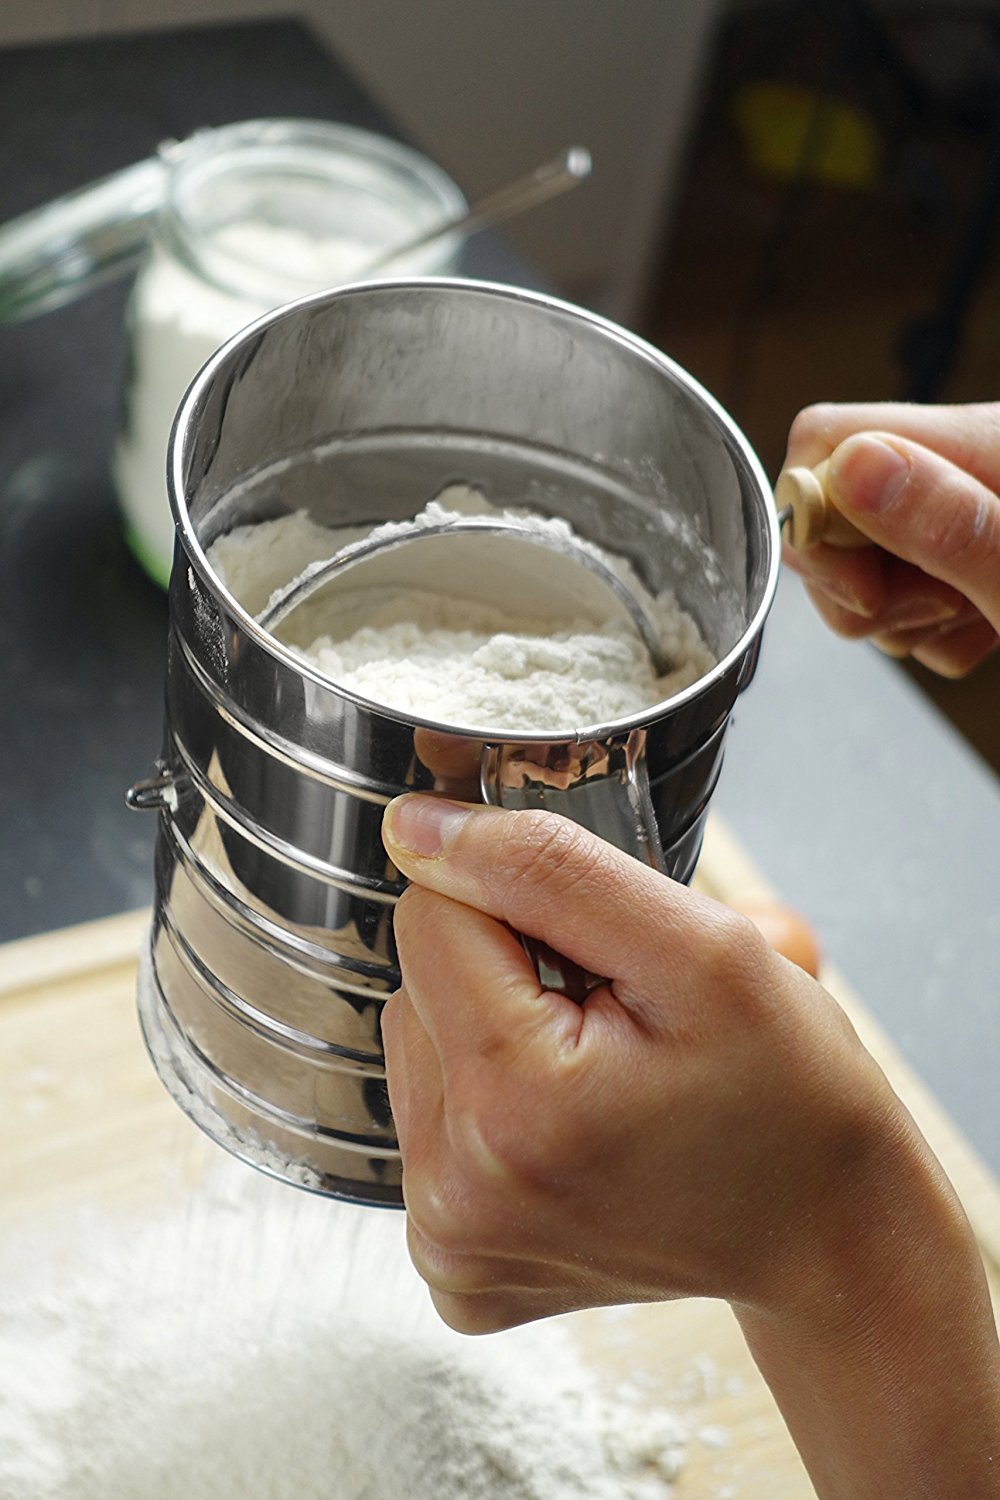 Nellam Traditional Flour Sifter Stainless Steel (5 Cup)